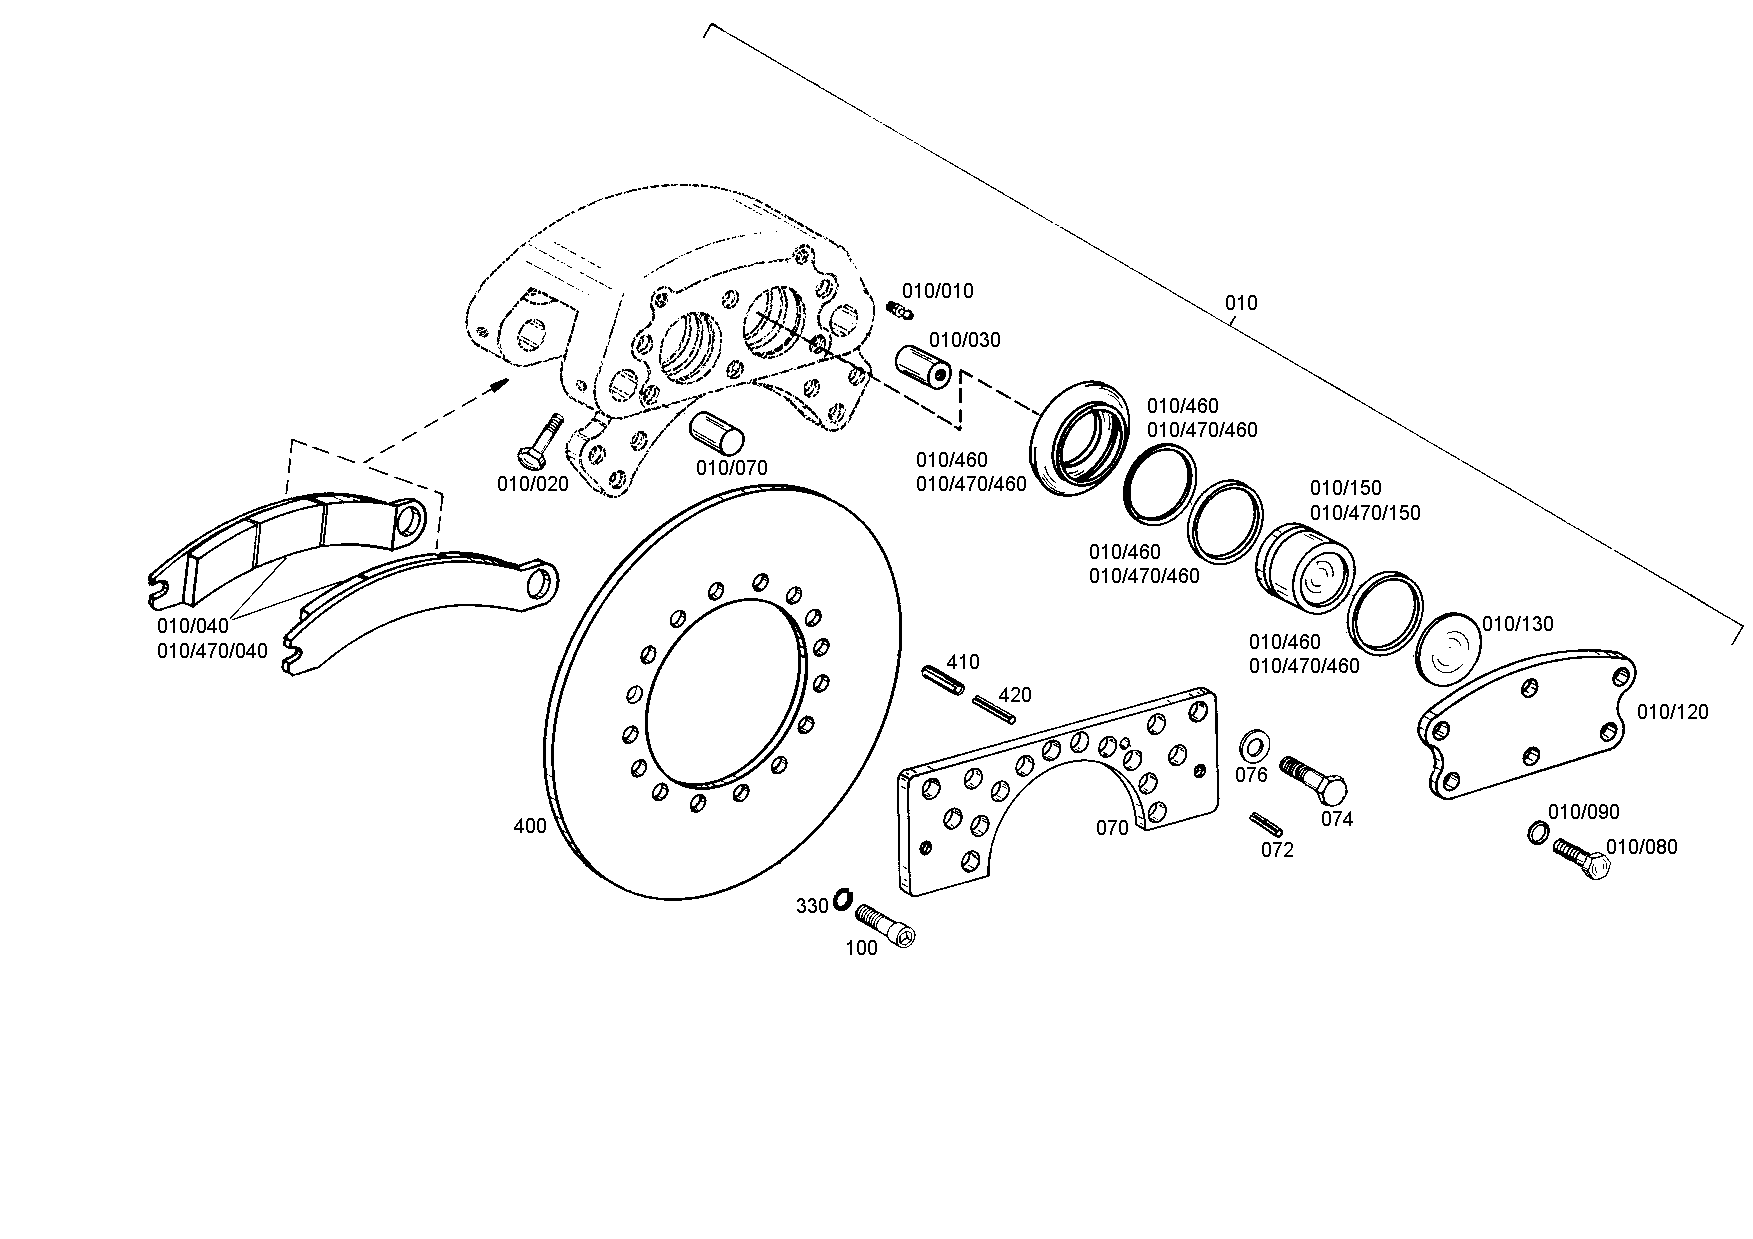 drawing for CATERPILLAR INC. 012394 - WASHER (figure 5)